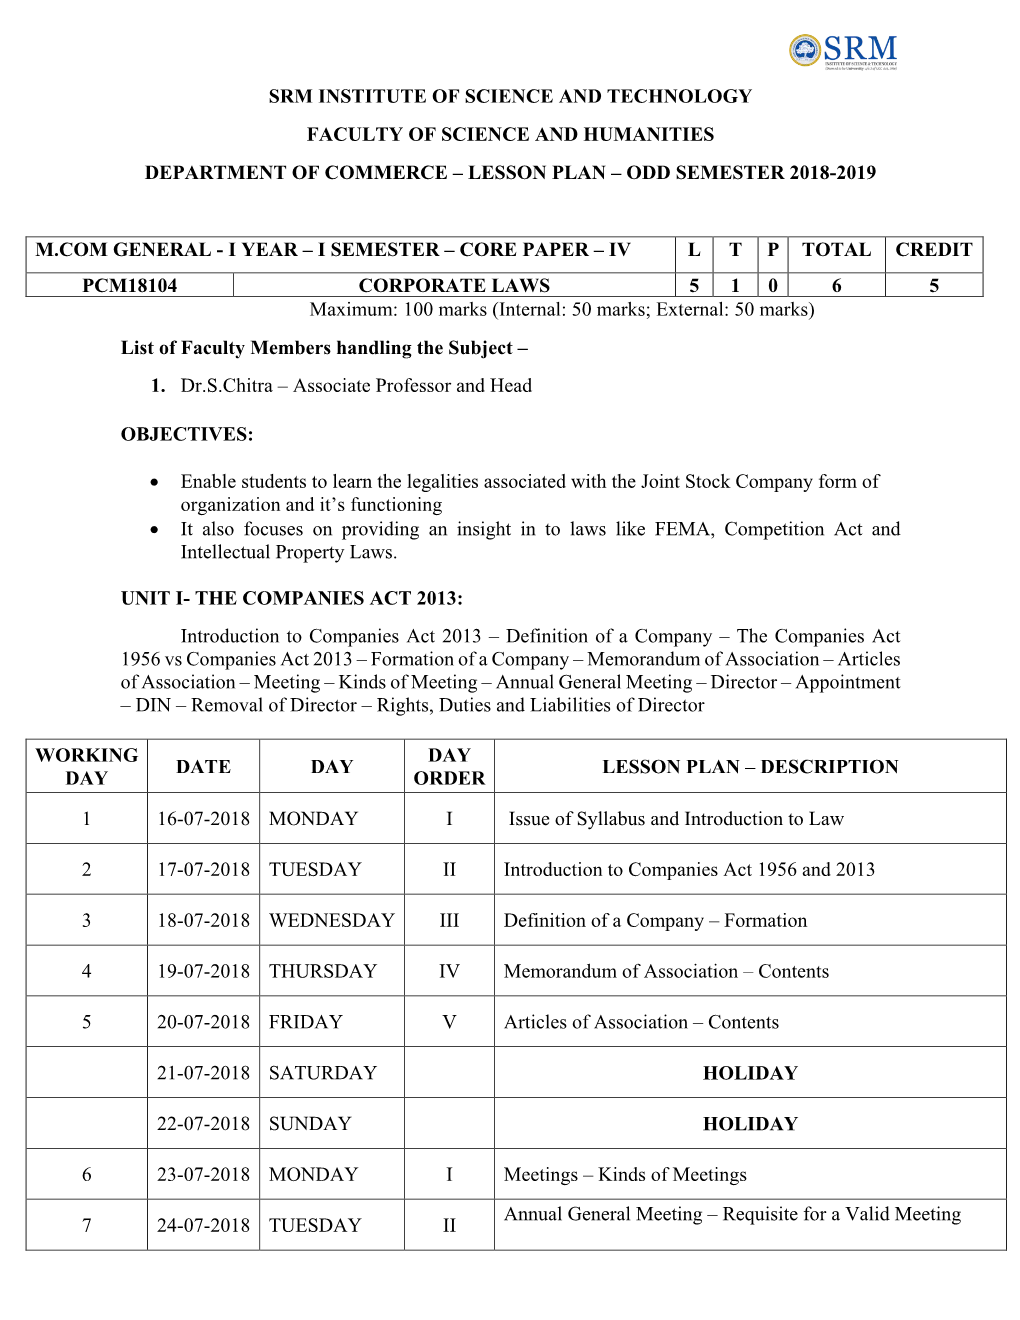 Srm Institute of Science and Technology Faculty of Science and Humanities Department of Commerce – Lesson Plan – Odd Semester 2018-2019